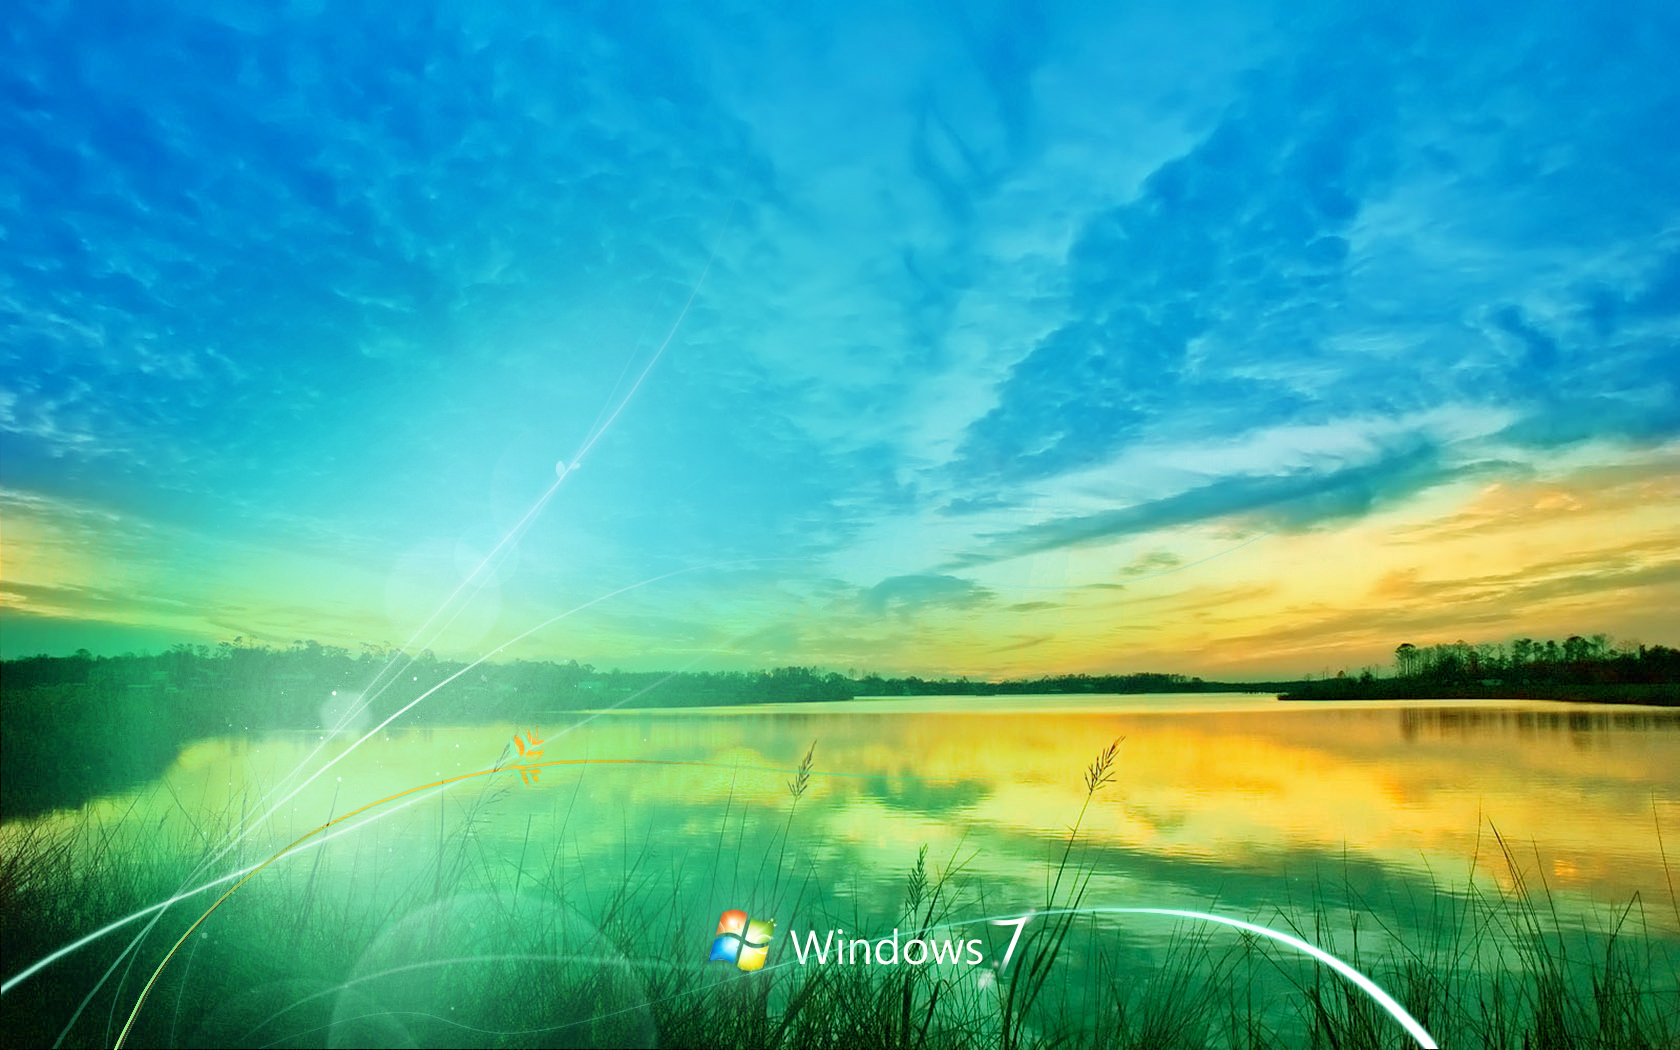 Download 14 Awesome Windows 10/8/7 Themes